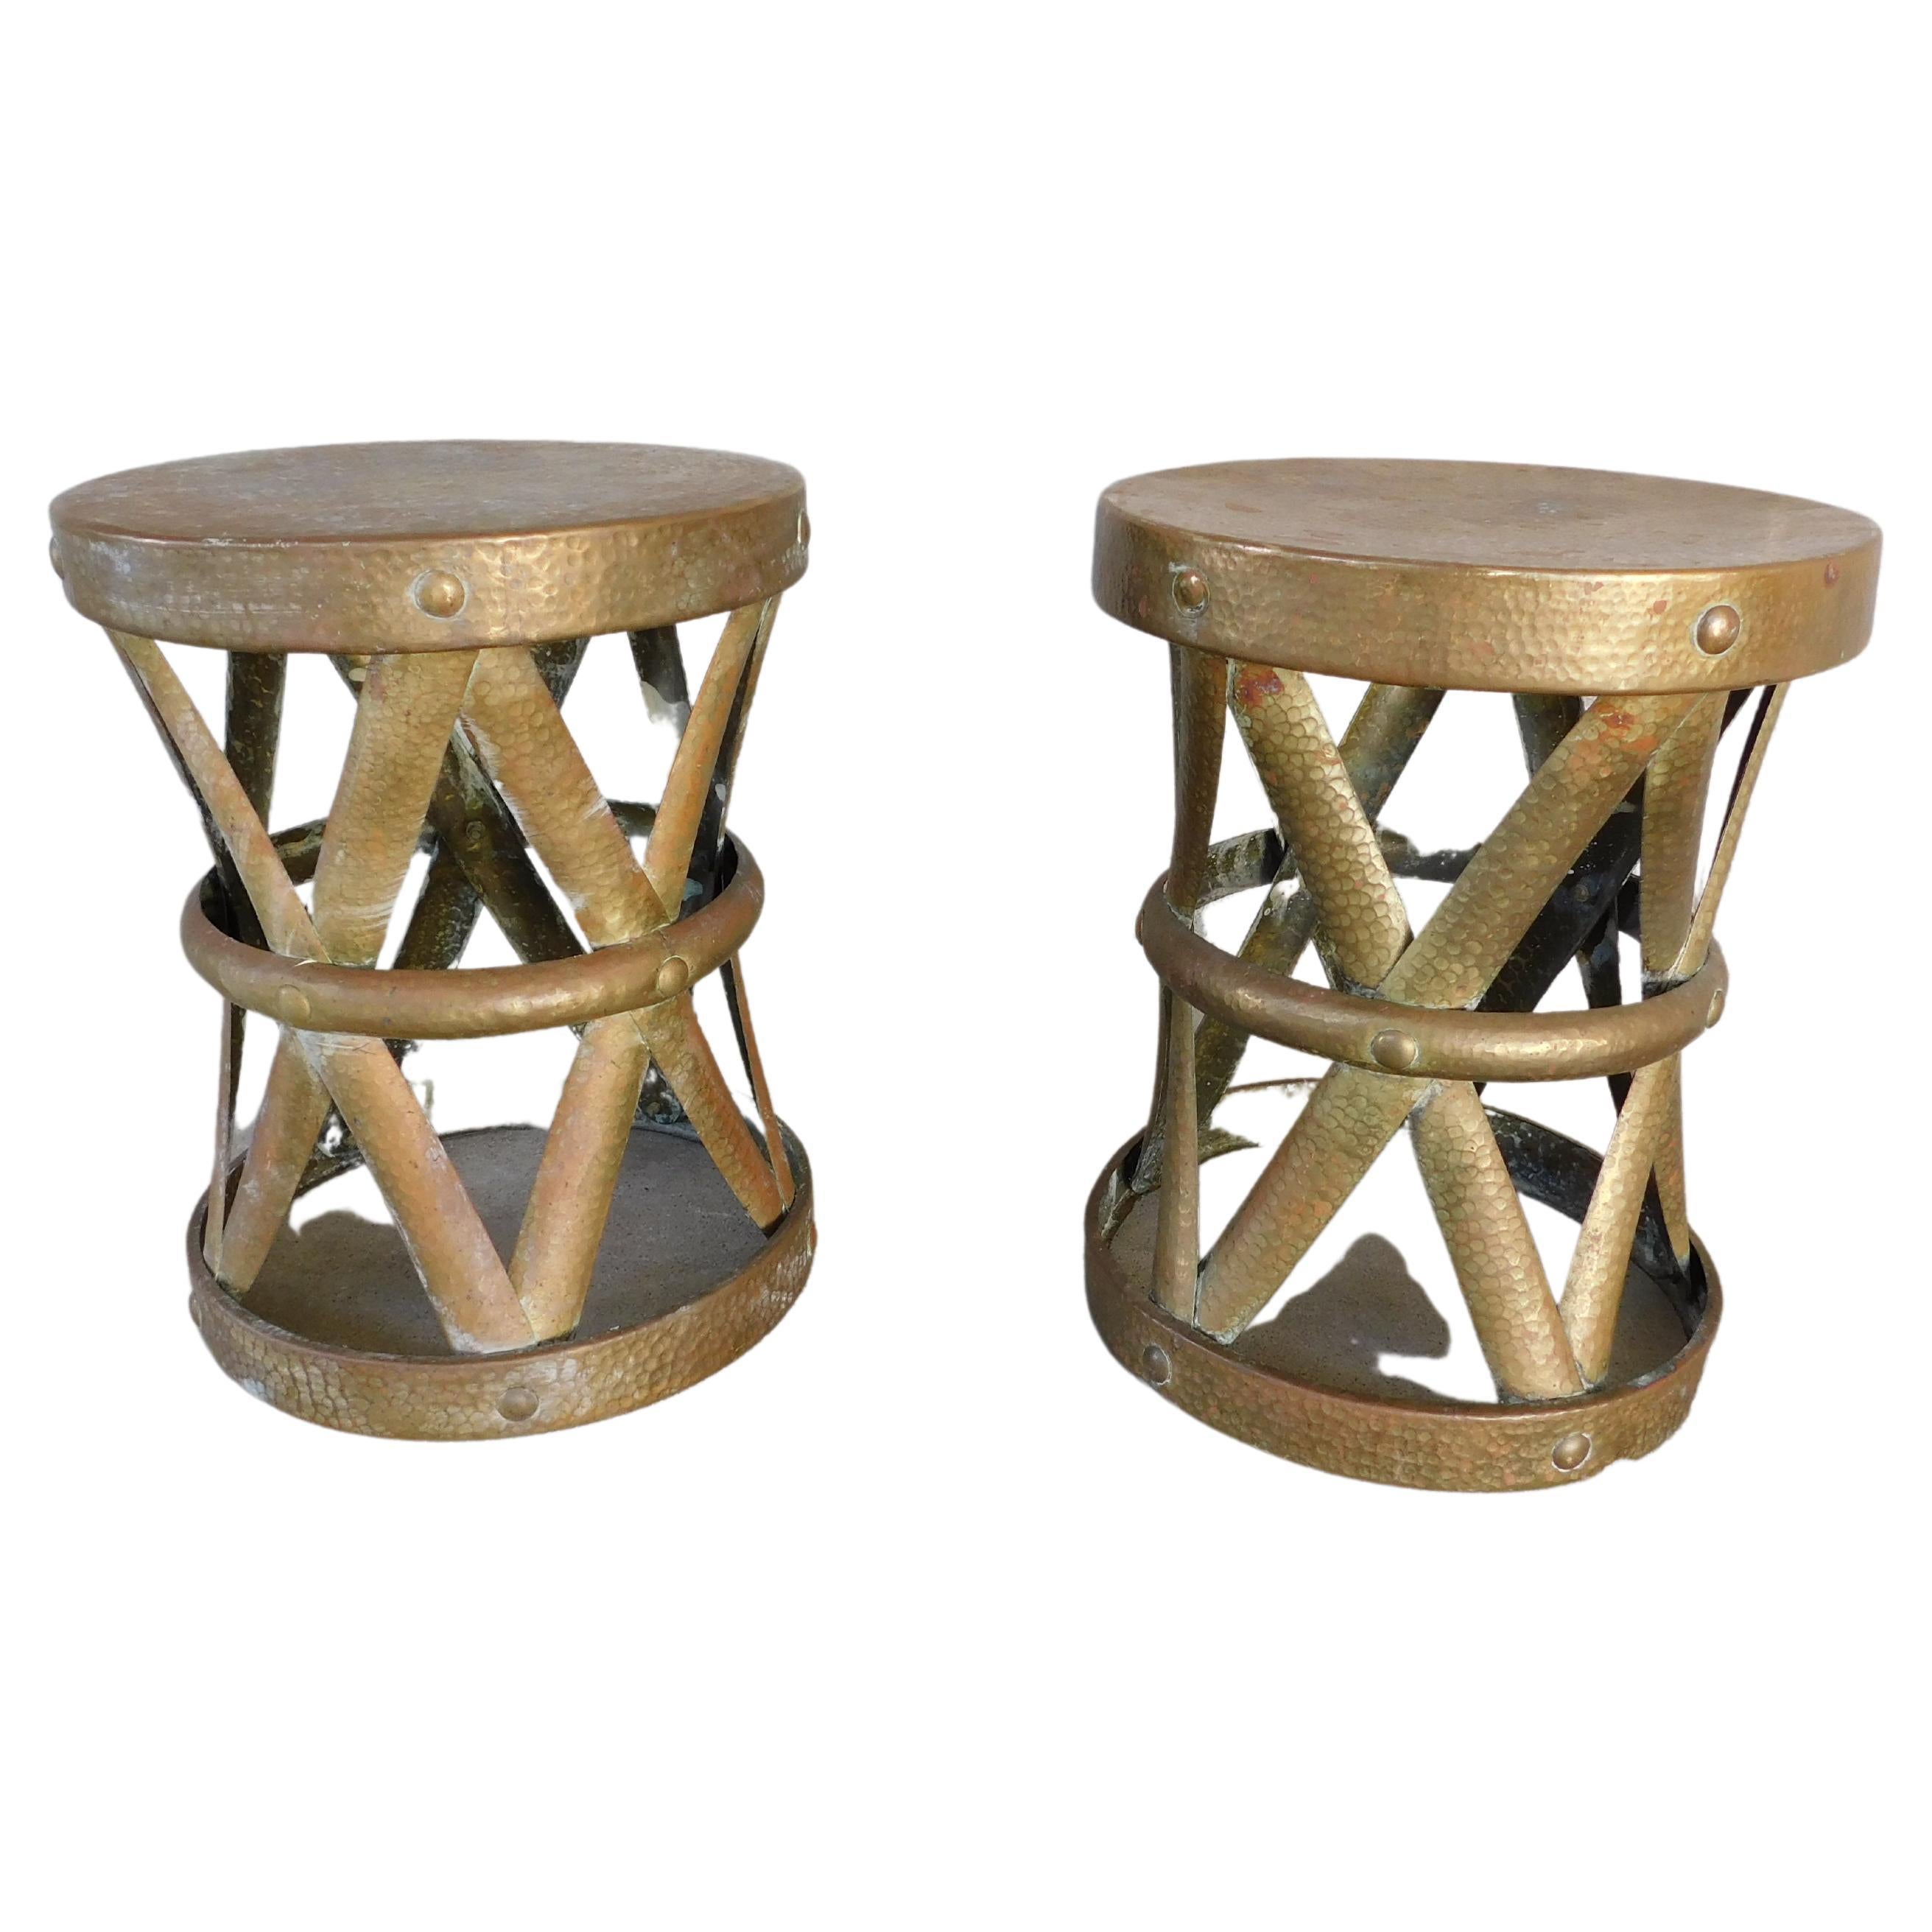 Mid-Century Hammered Brass Accent Tables or Stools, a Pair For Sale